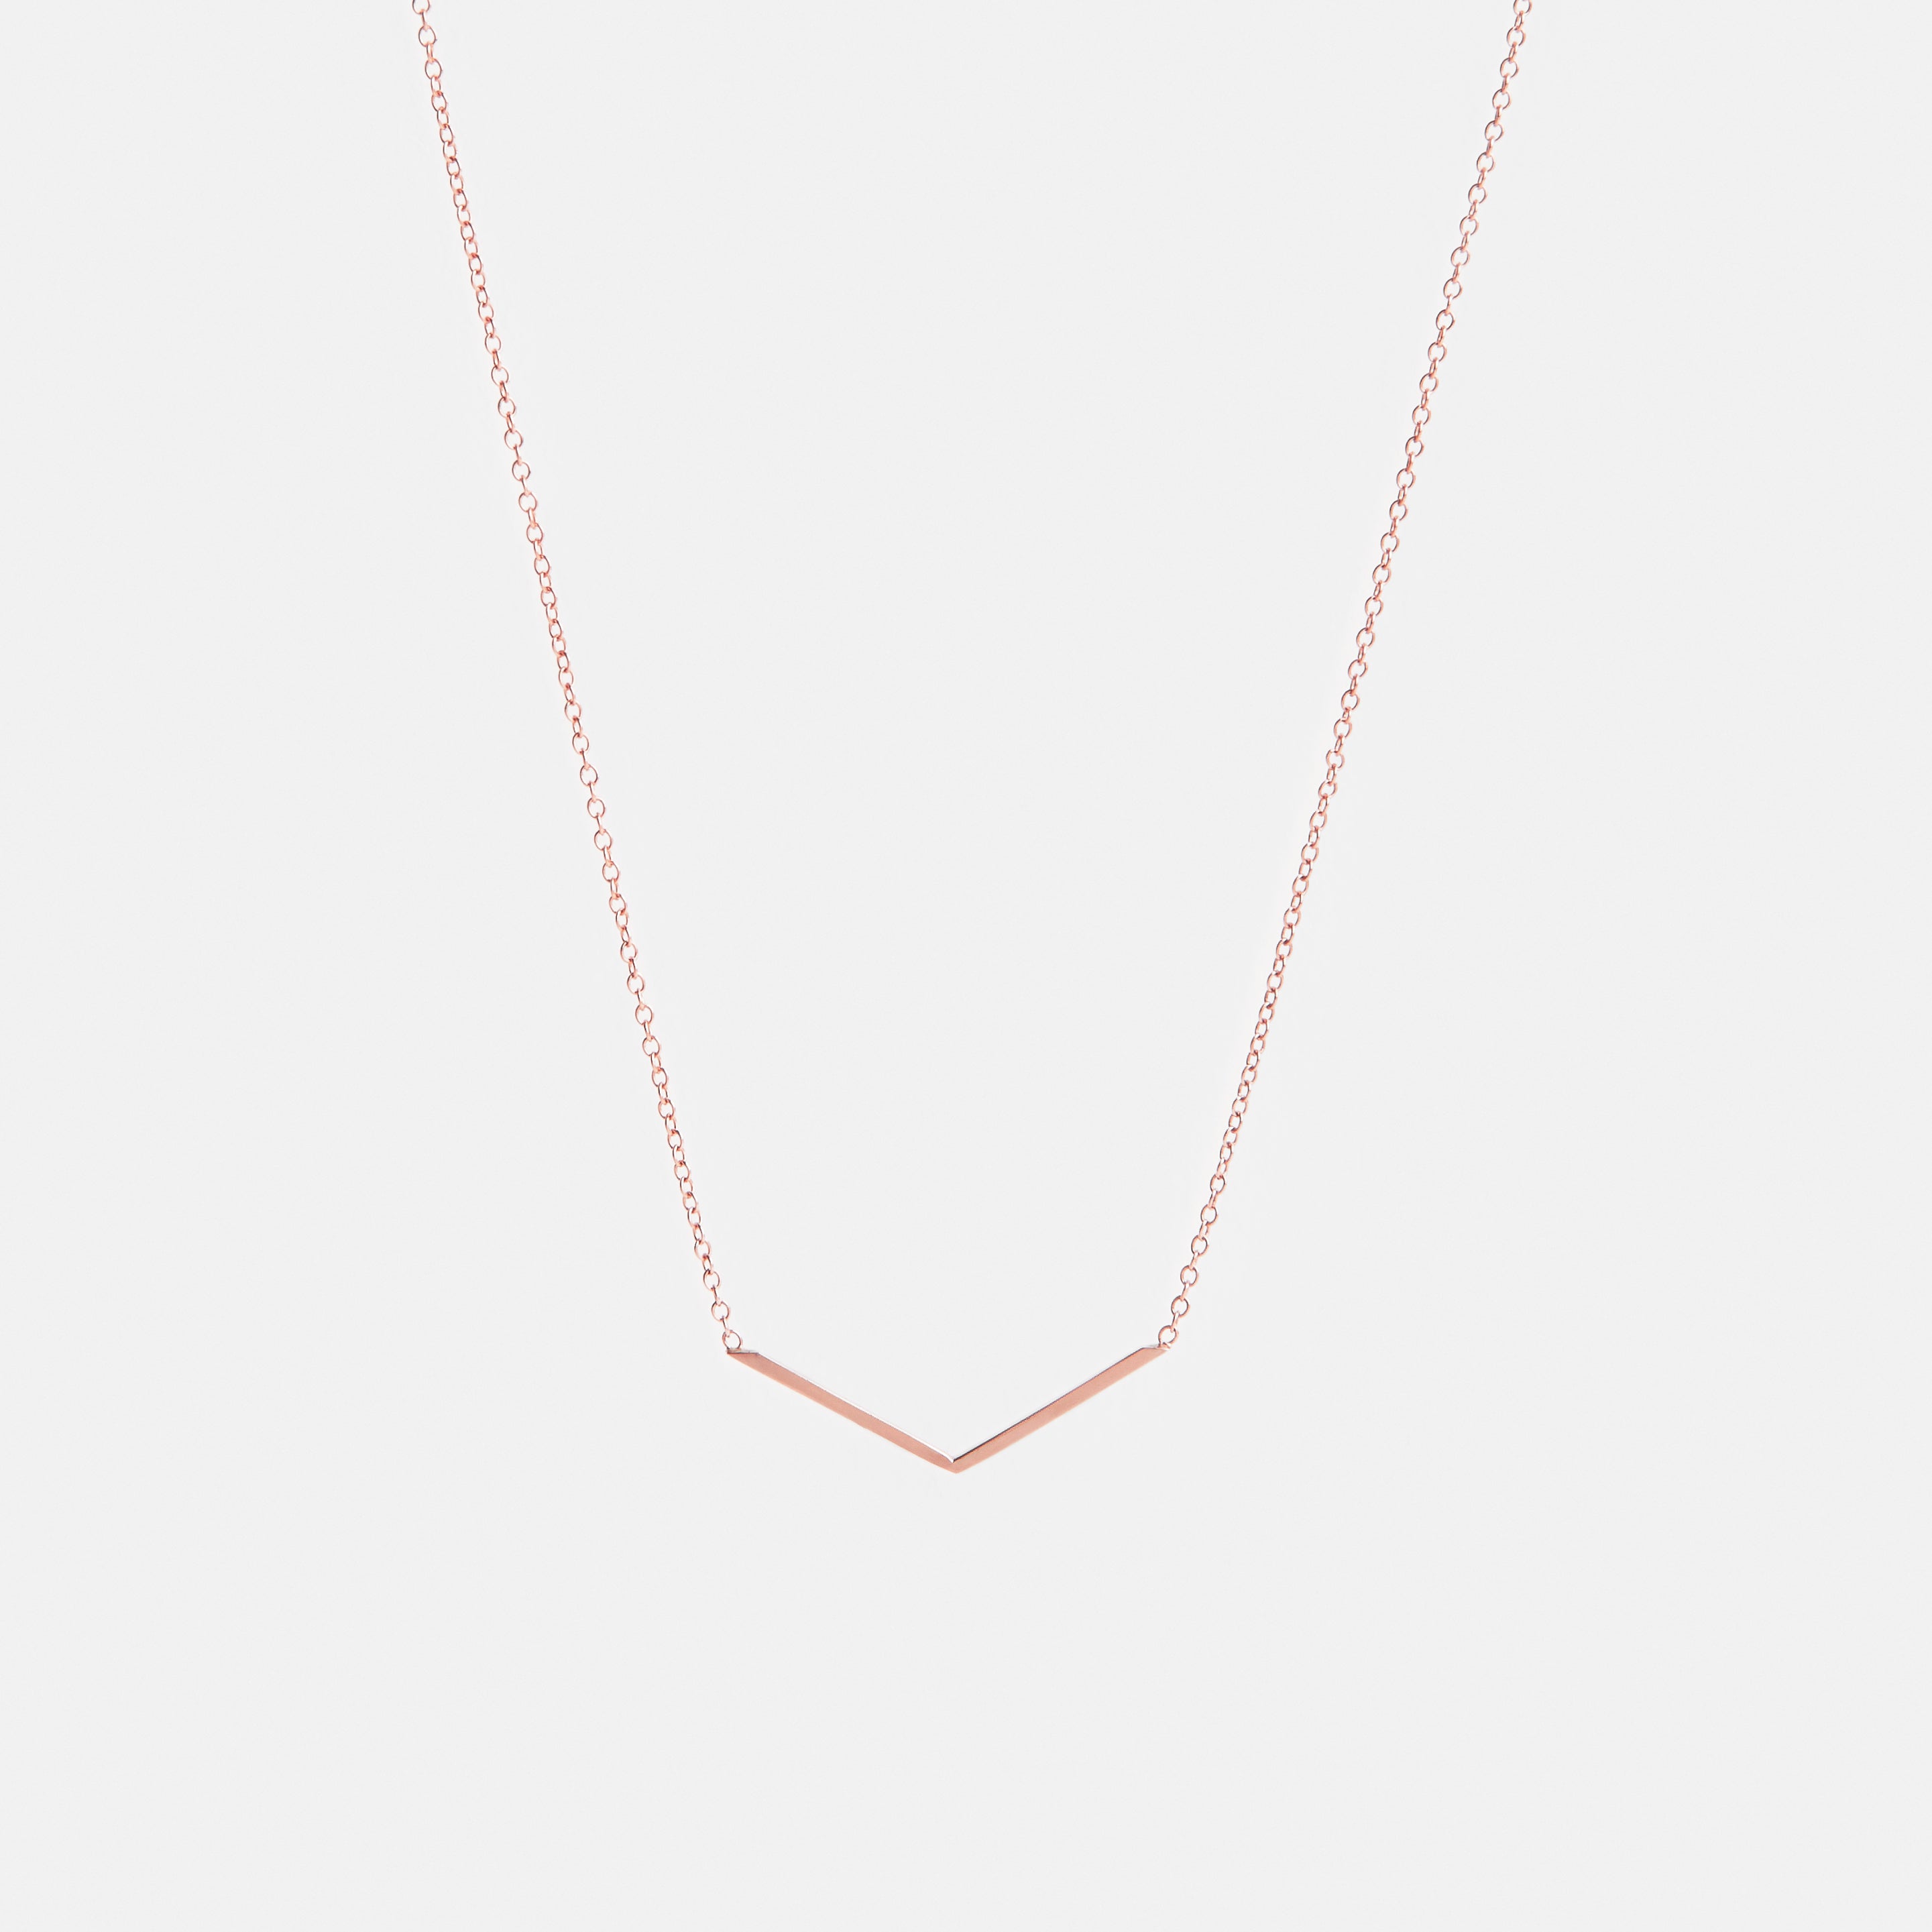 Avi Handmade Necklace in 14k Rose Gold By SHW Fine Jewelry New York City